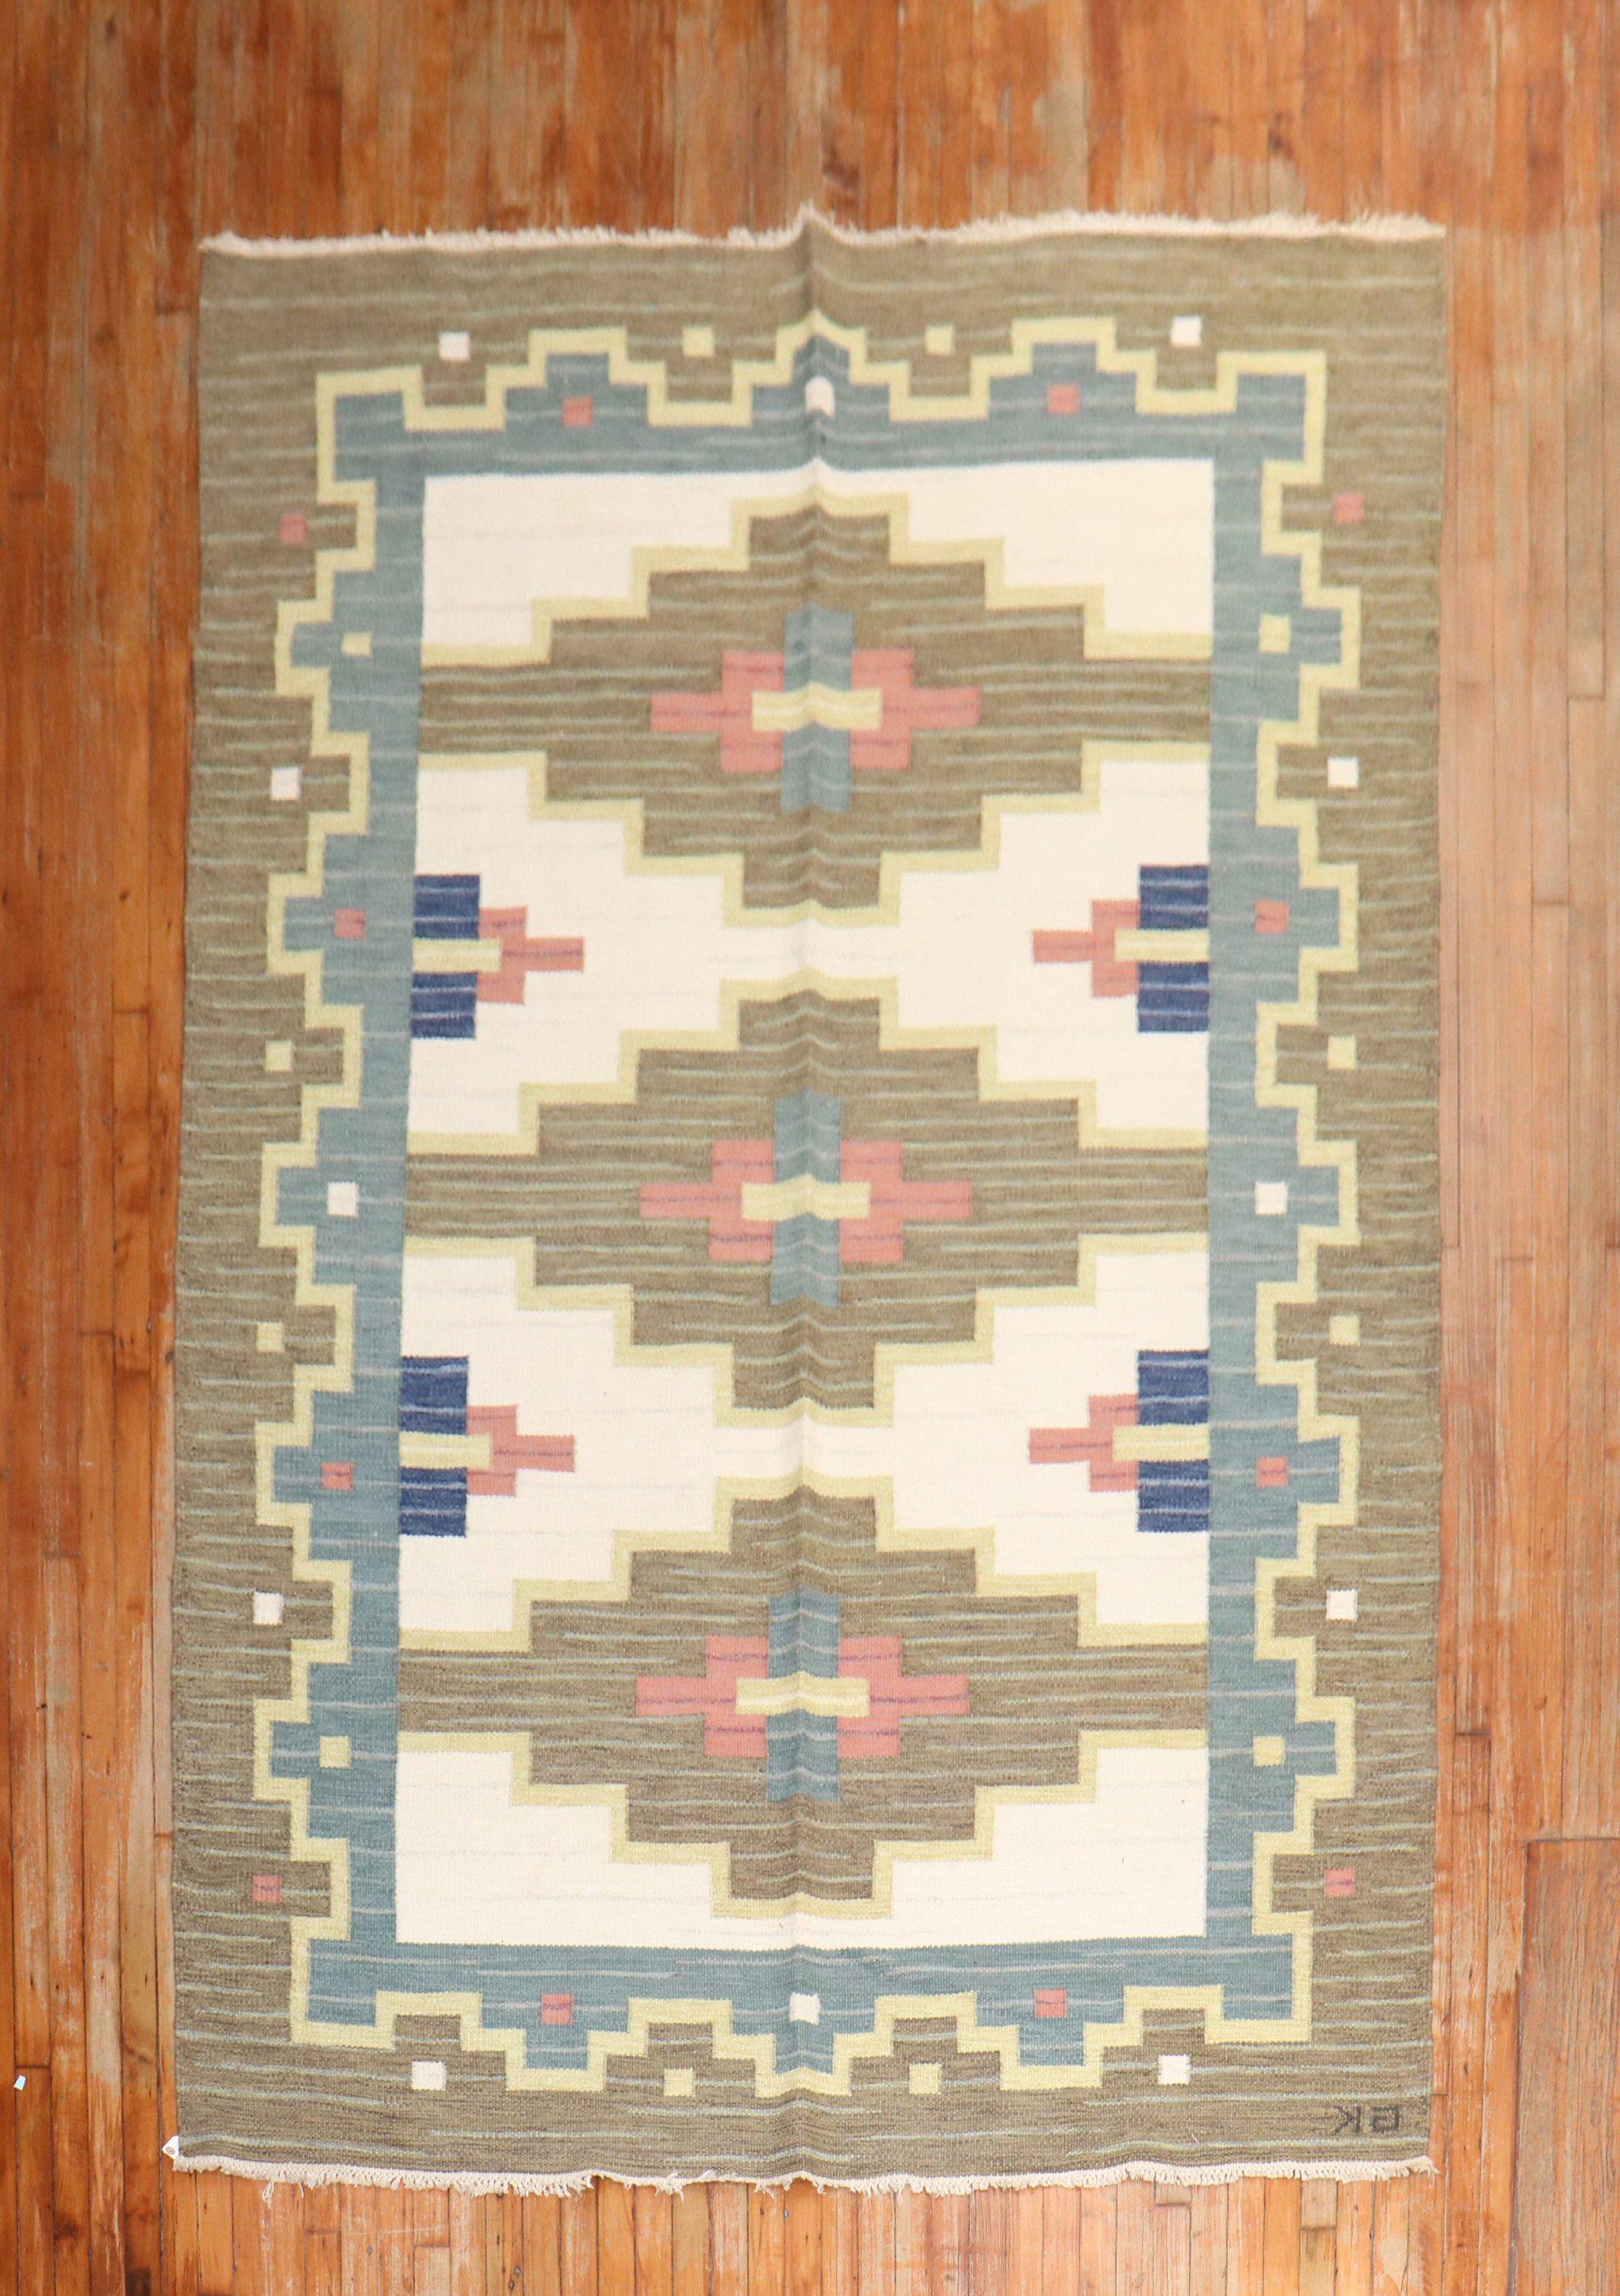 Swedish flatweave Röllakan carpet signed GK by an unknown designer from the 1950s.

Measures: 6'8'' x 9'8